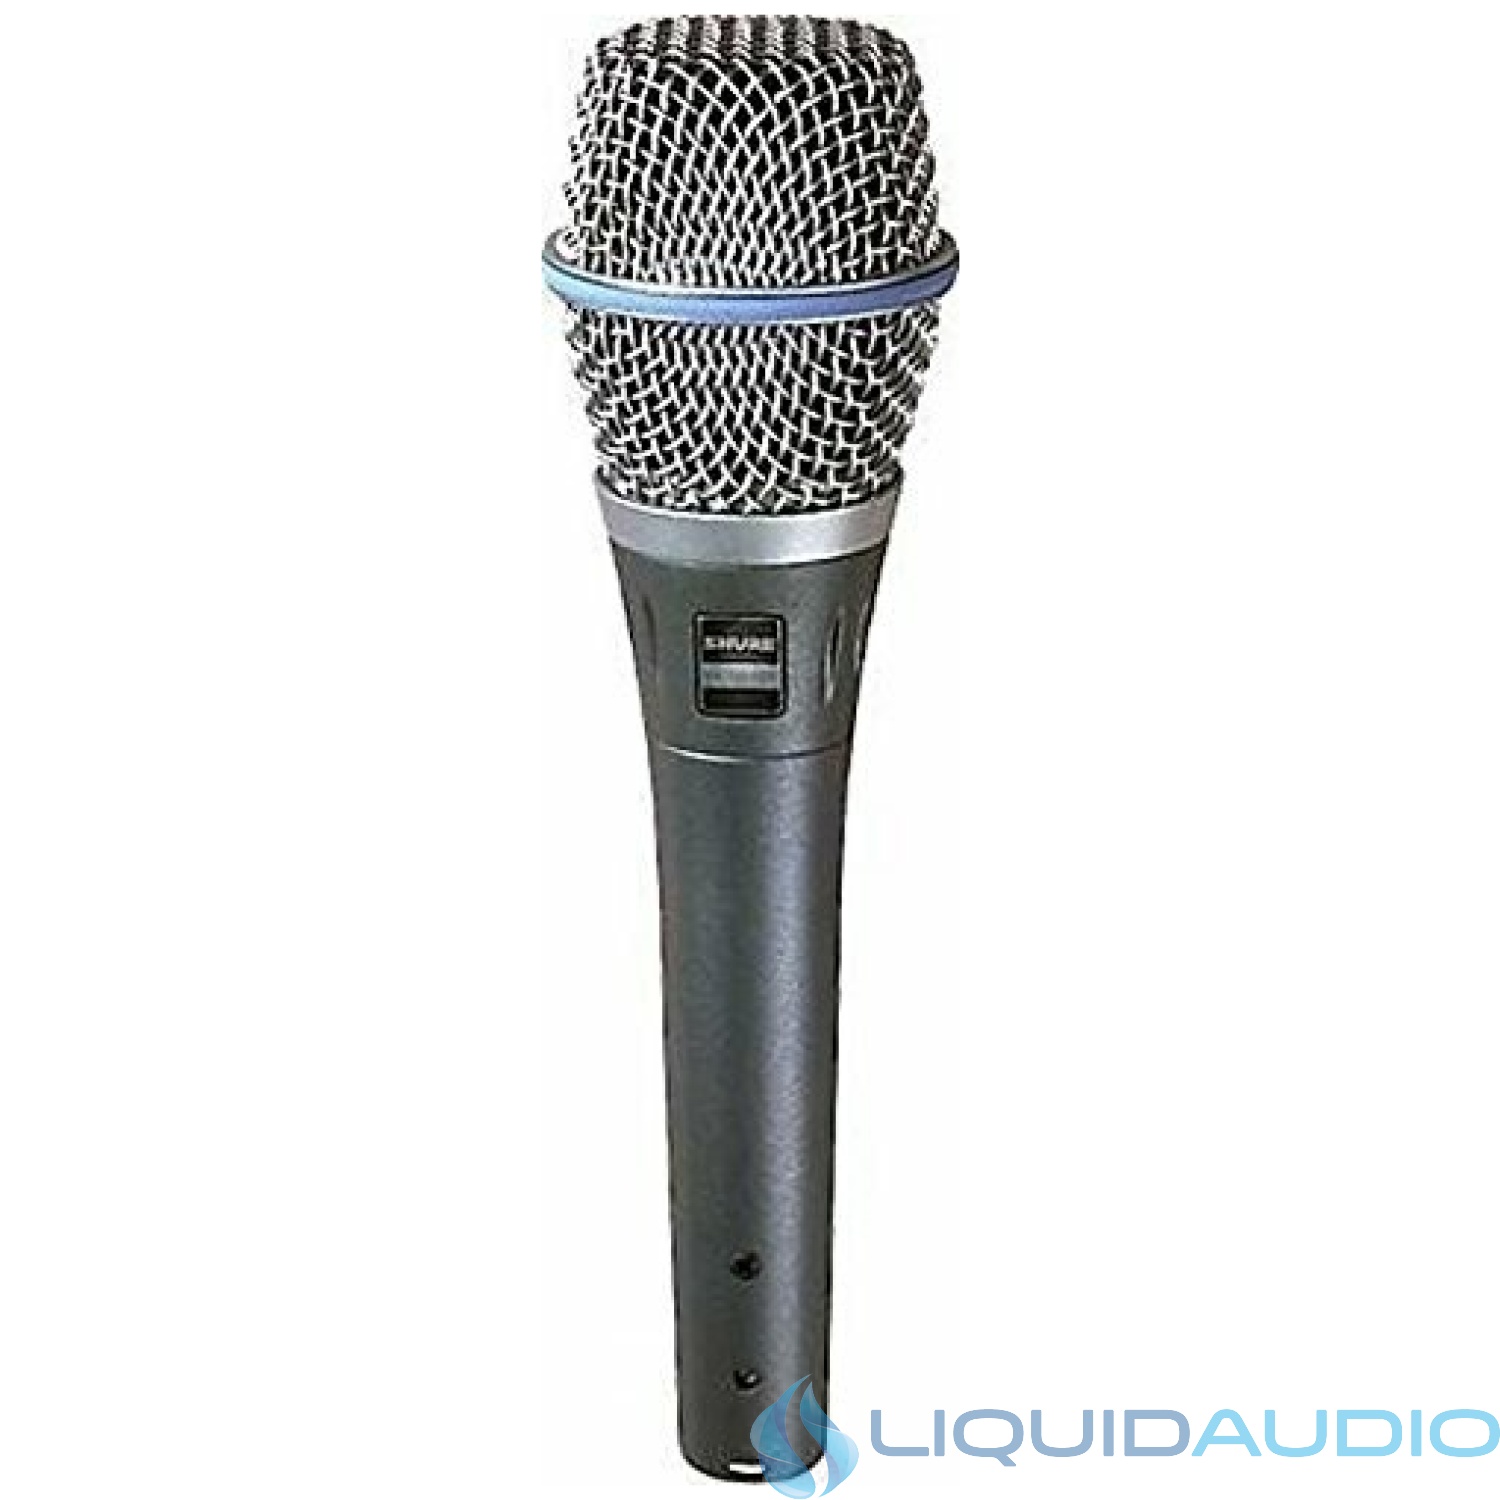 Shure BETA87A Supercardioid Condenser Microphone for Handheld Vocal Applications